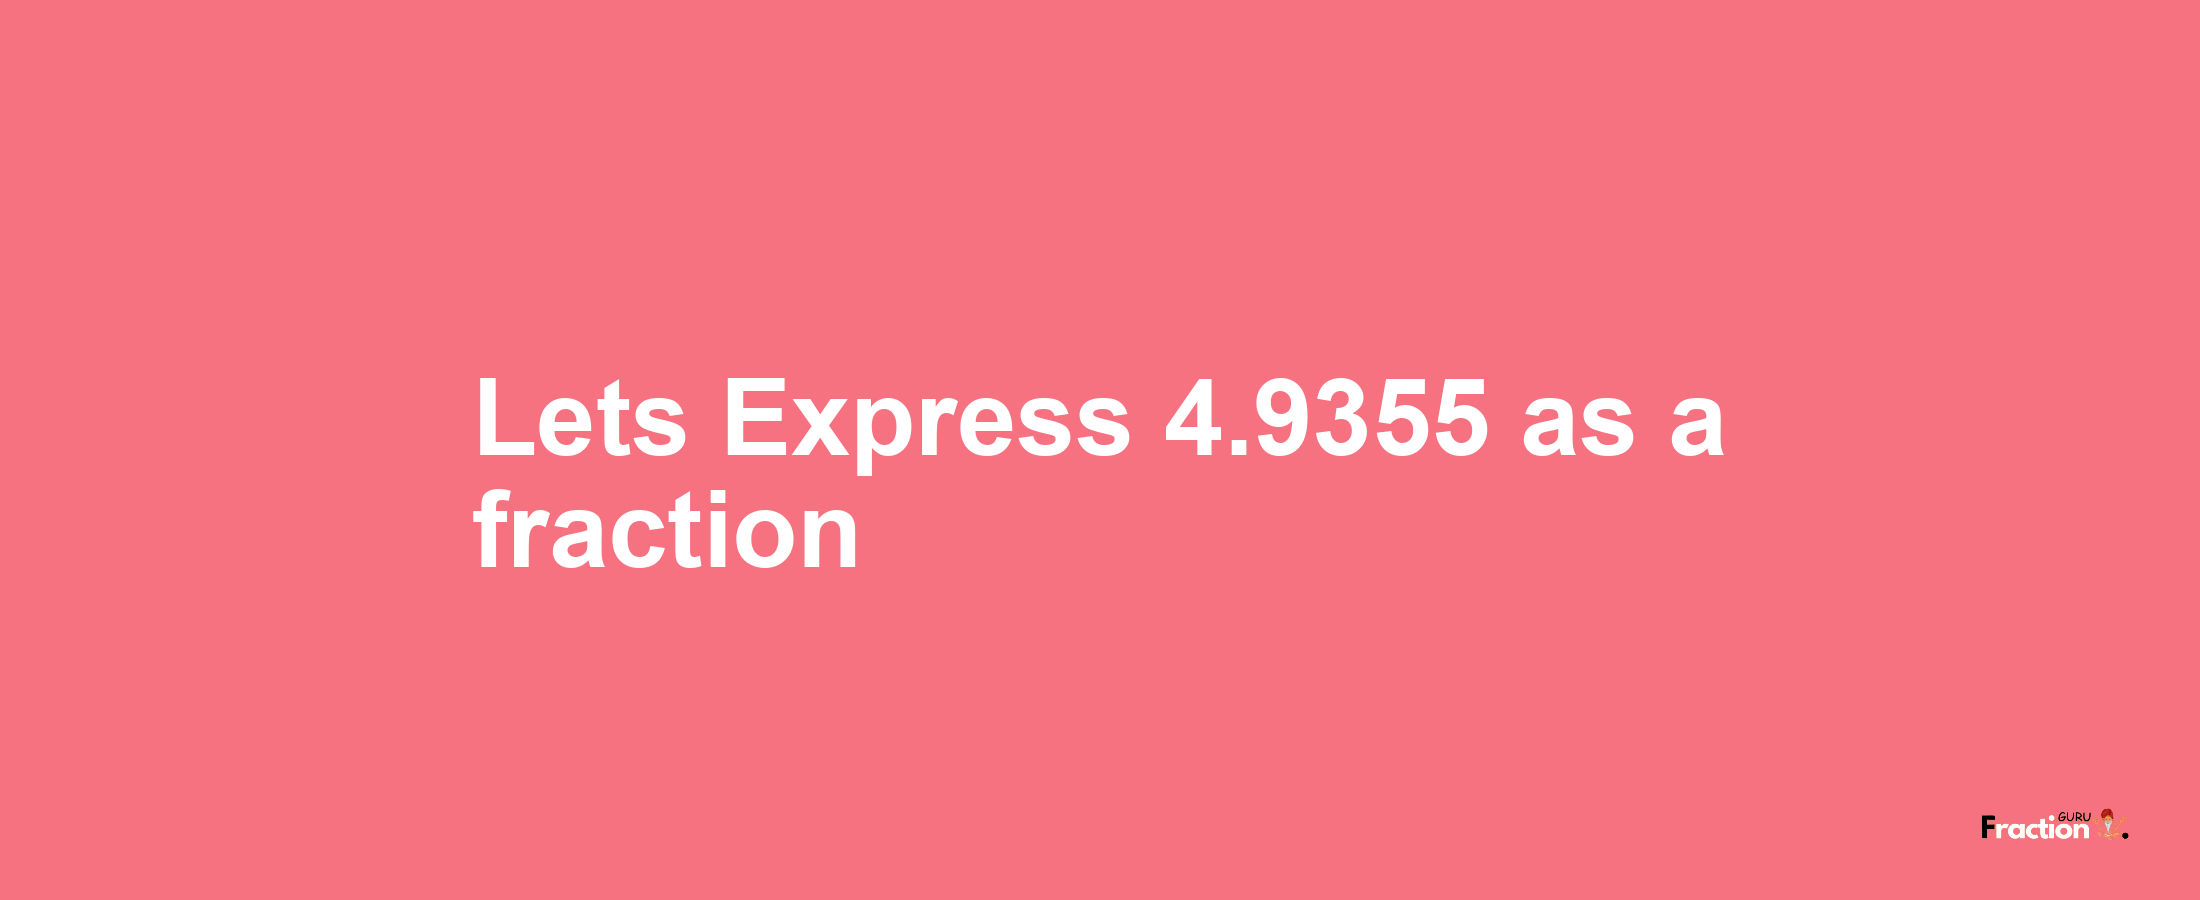 Lets Express 4.9355 as afraction